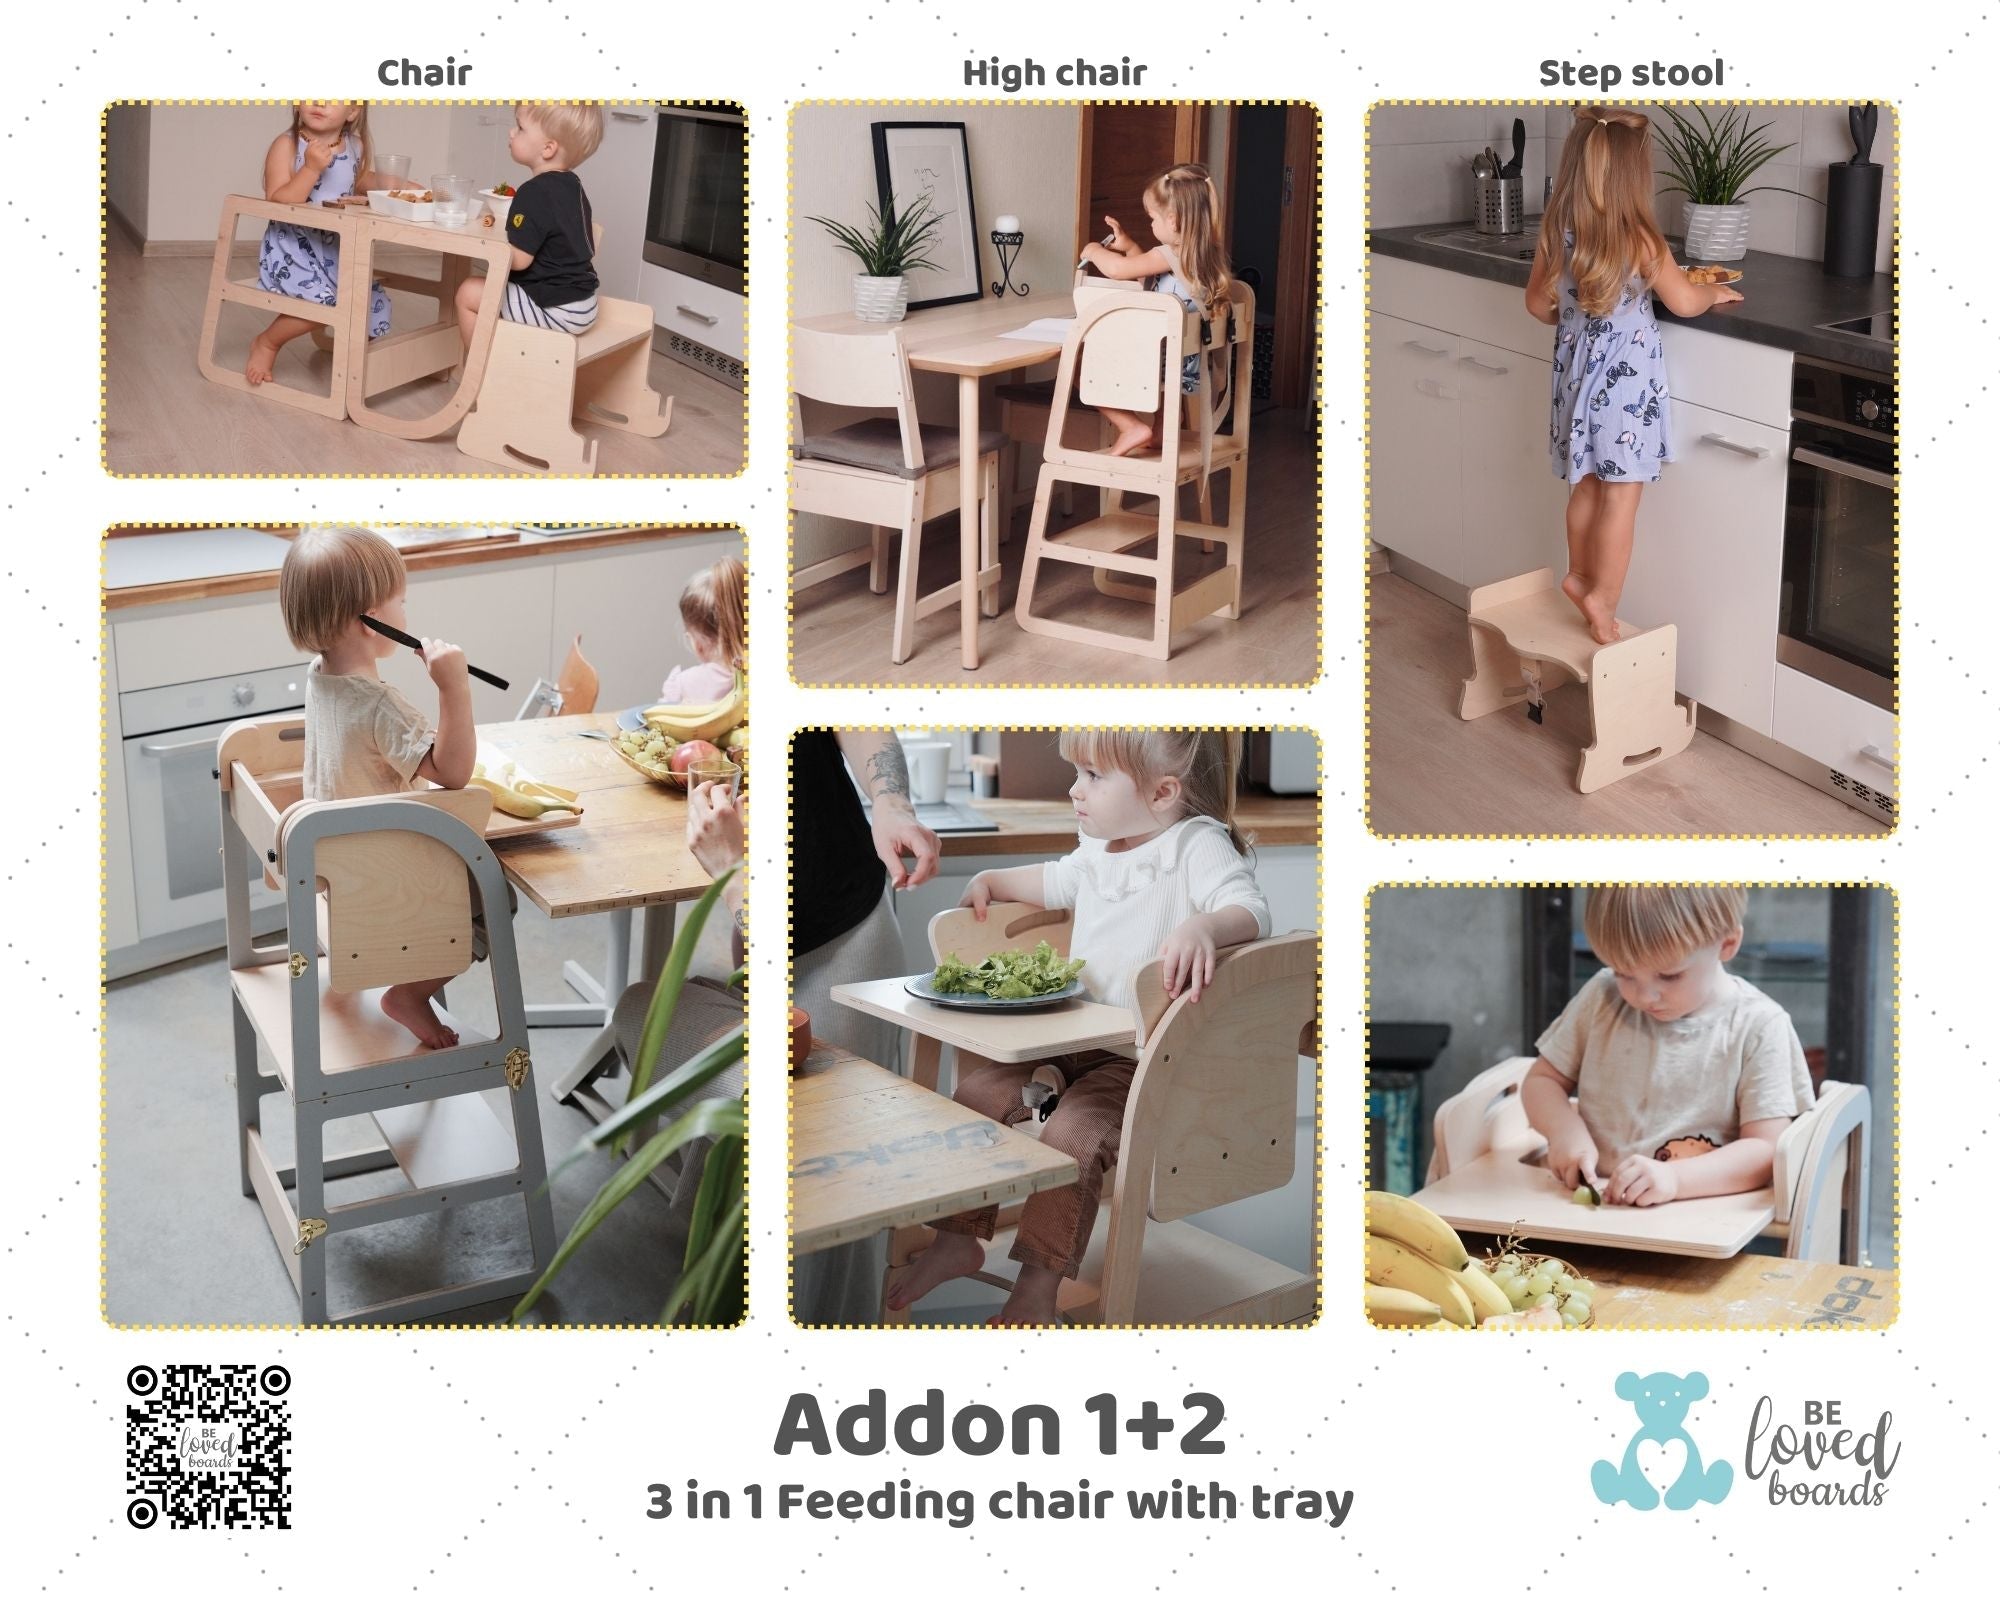 Transformable learning kitchen tower - Beloved boards